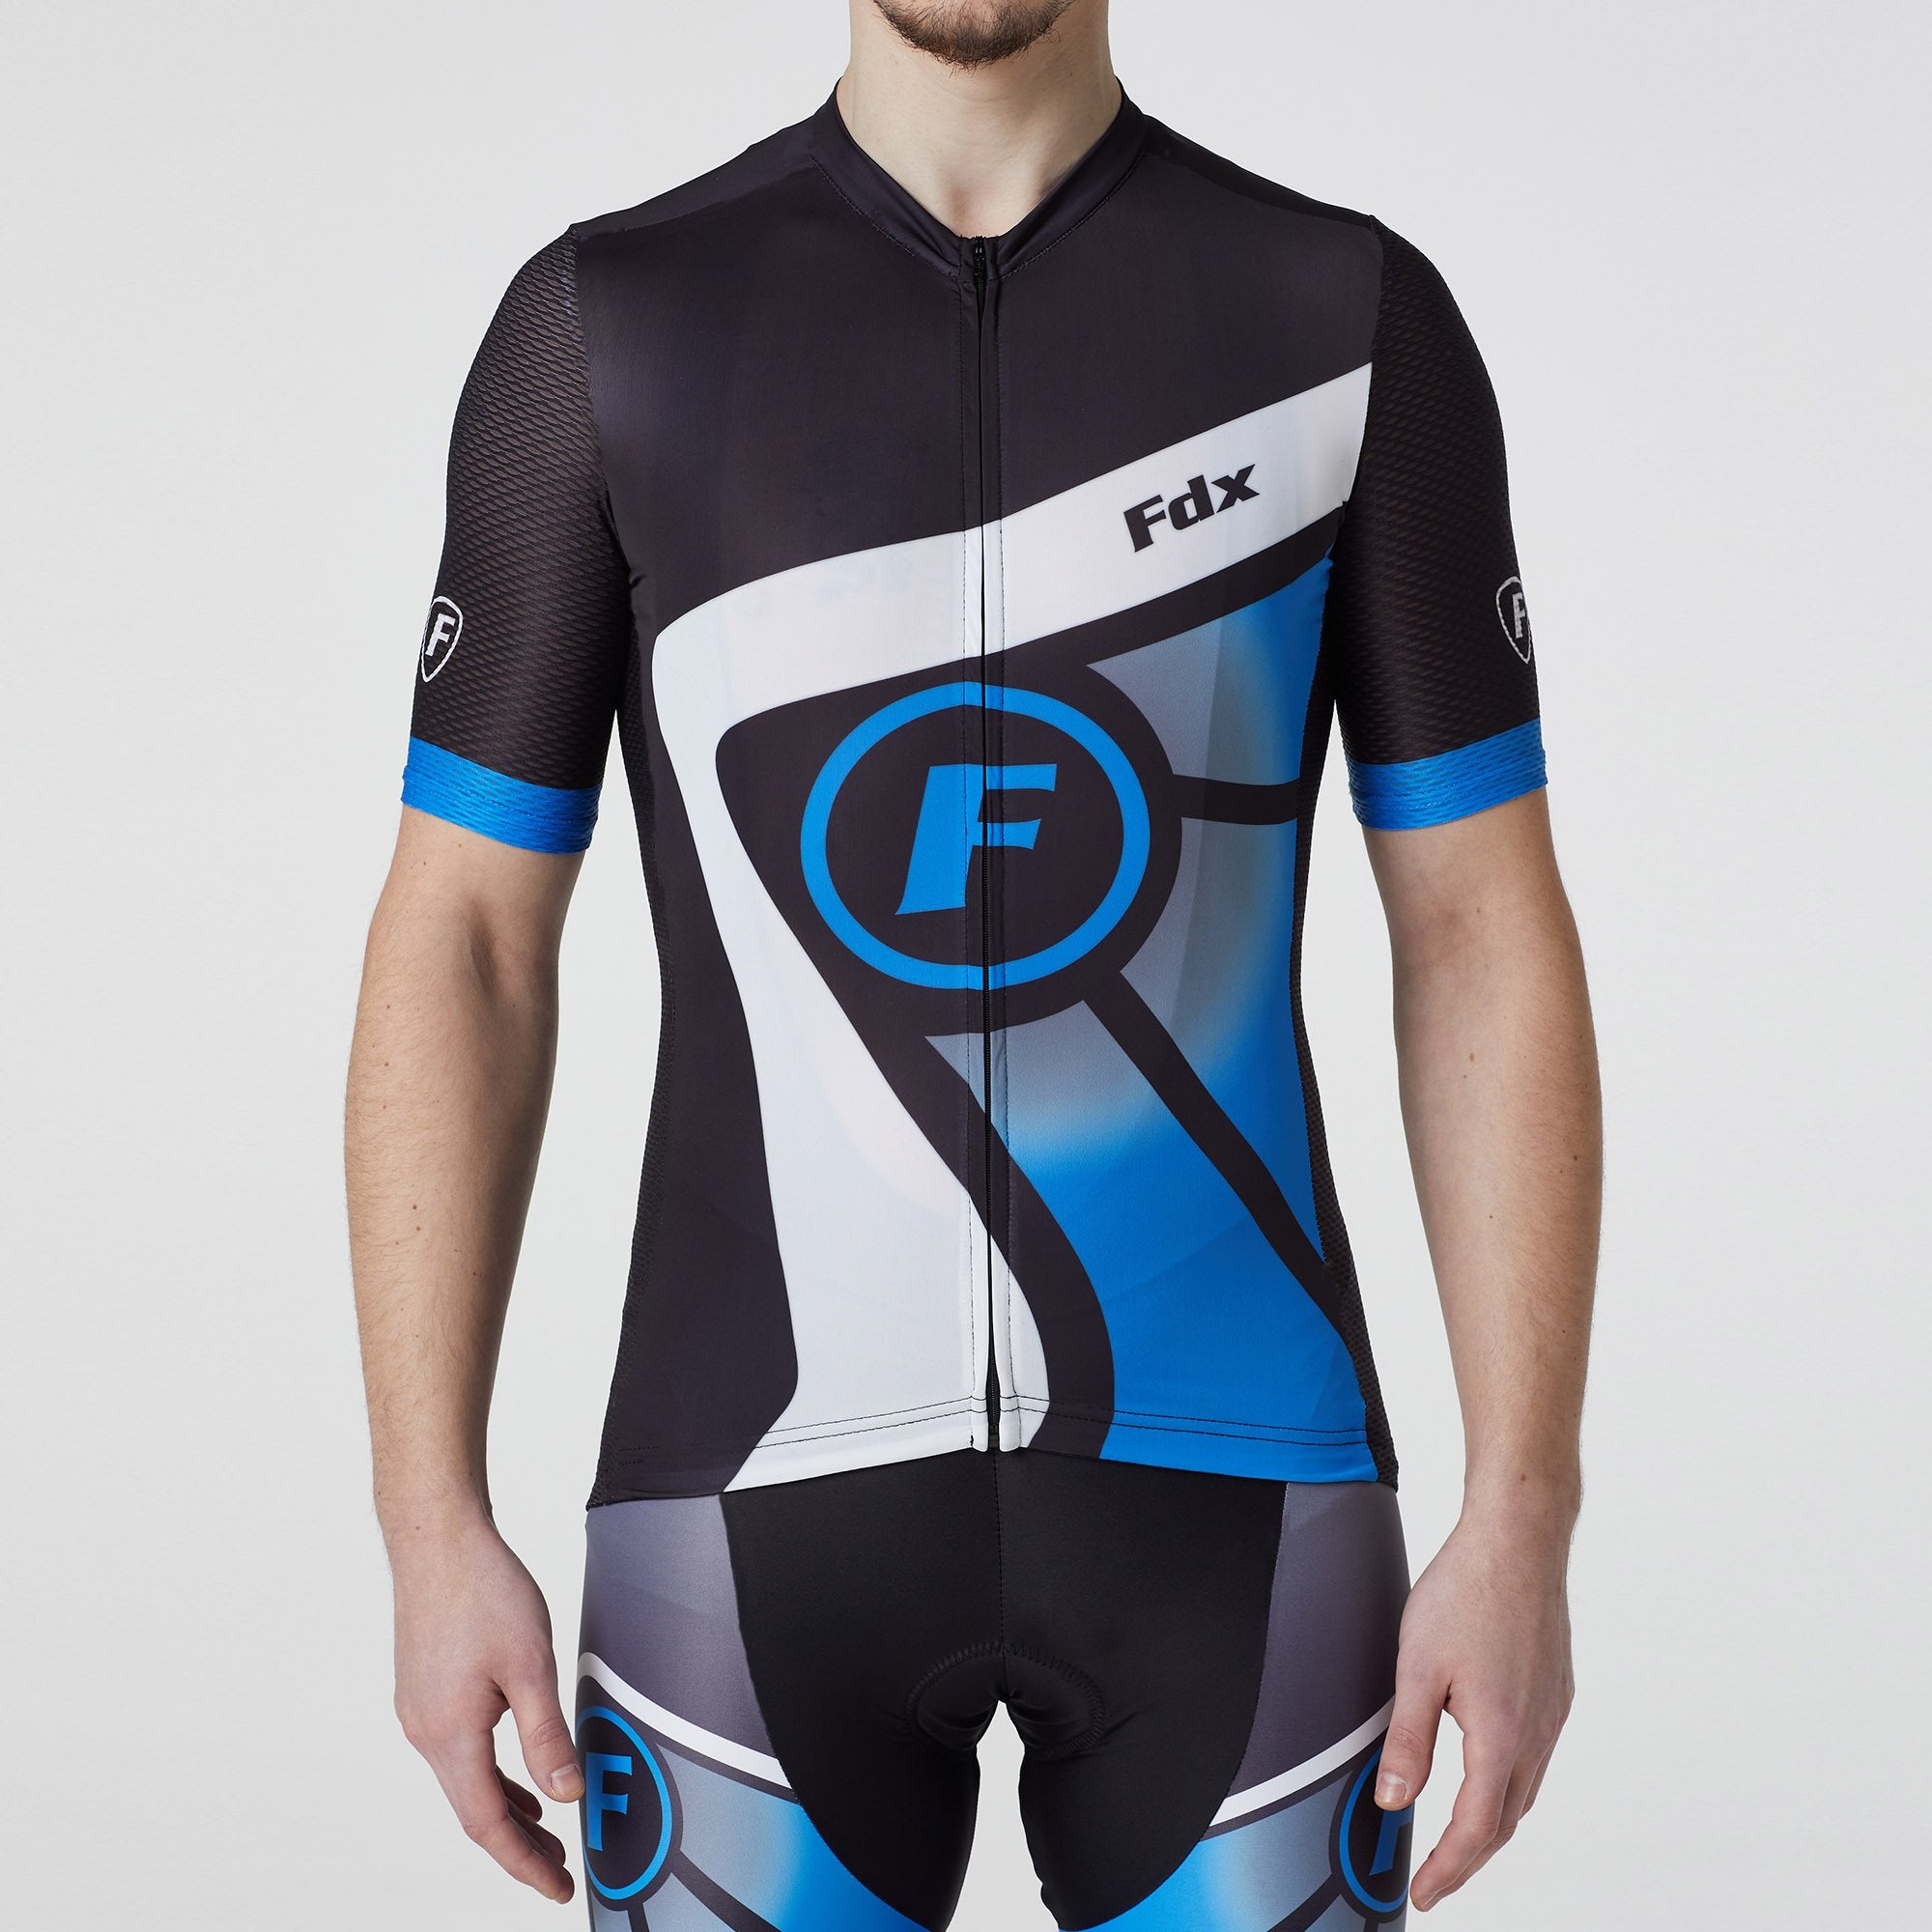 Fdx black & blue best men’s short sleeves cycling jersey breathable lightweight hi-viz Reflective details summer biking top, skin friendly full zip half sleeves mesh cycling shirt for indoor & outdoor riding with two back & 1 zip pockets